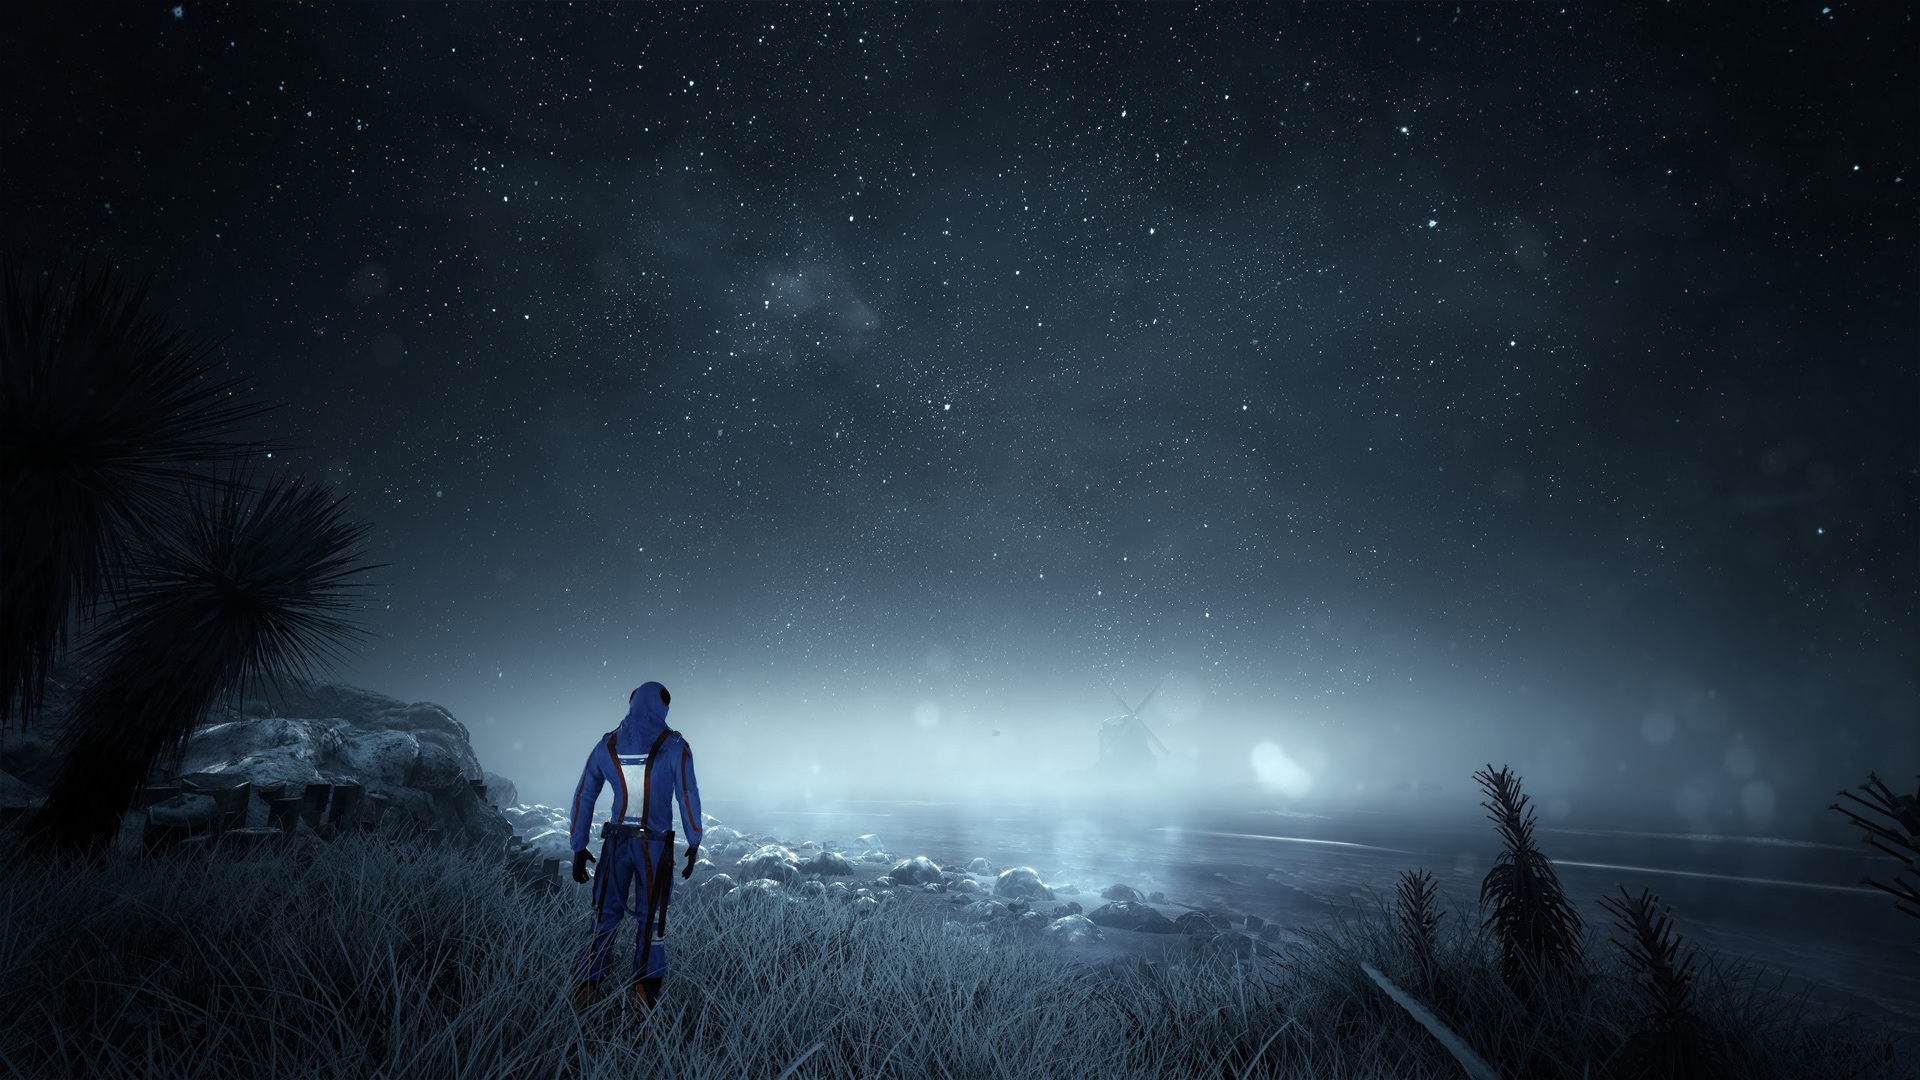 The Solus Project shown at E3 2015